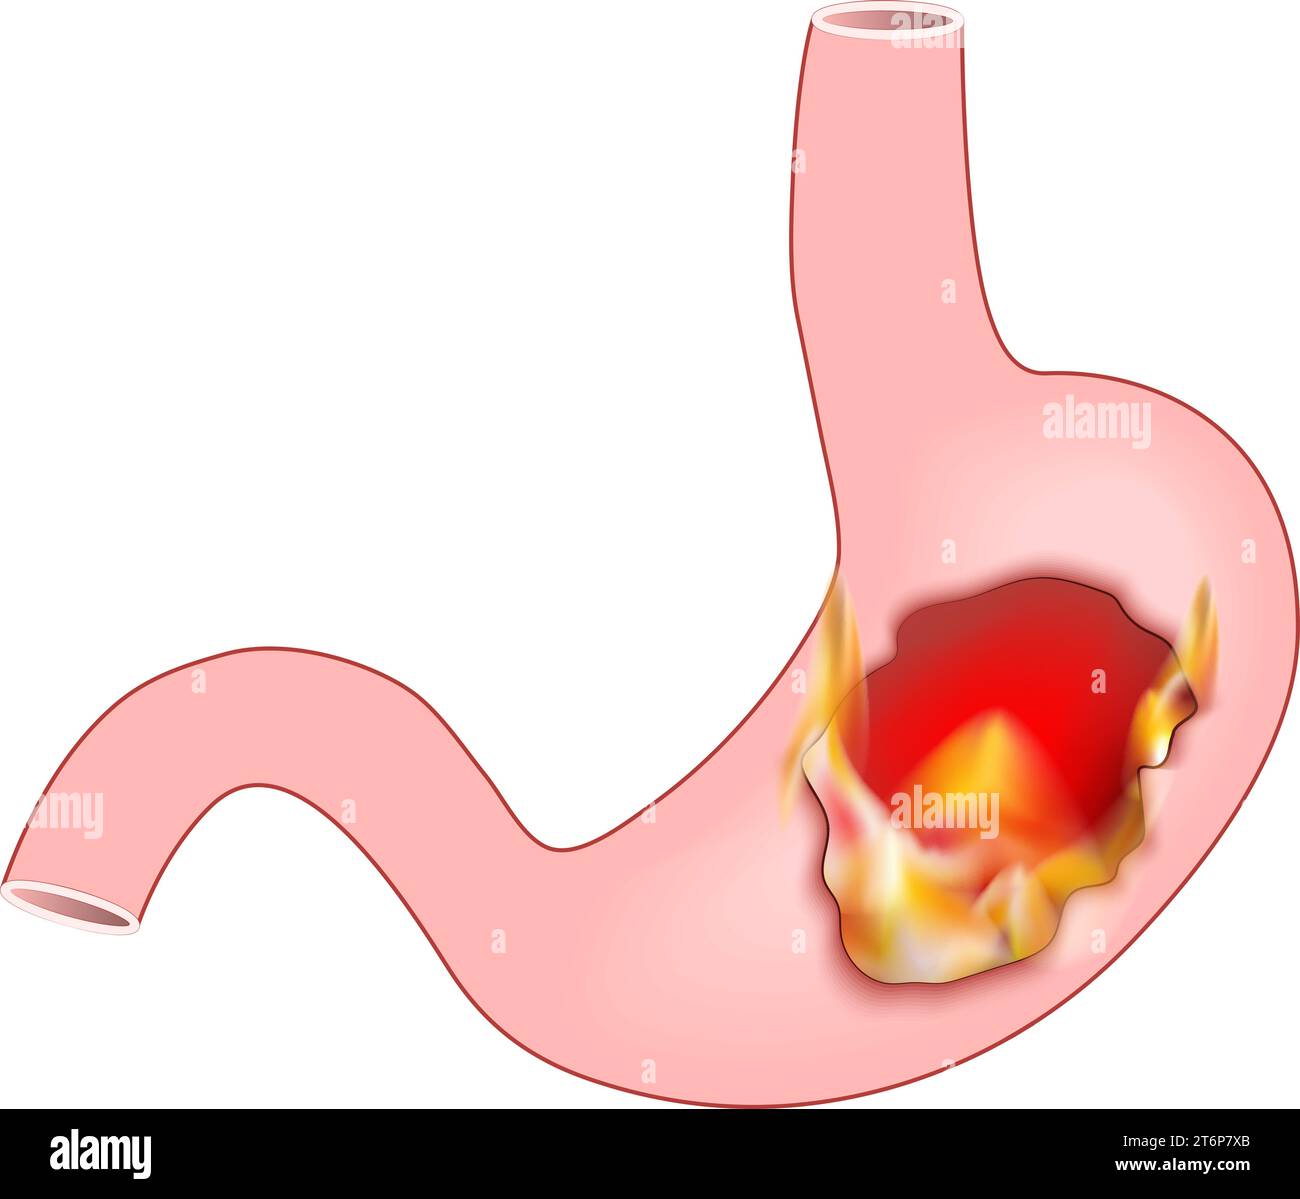 Heartburn. Human stomach with flame. Pyrosis, cardialgia or acid indigestion. burning sensation in the stomach. Gastroesophageal reflux disease GERD. Stock Vector